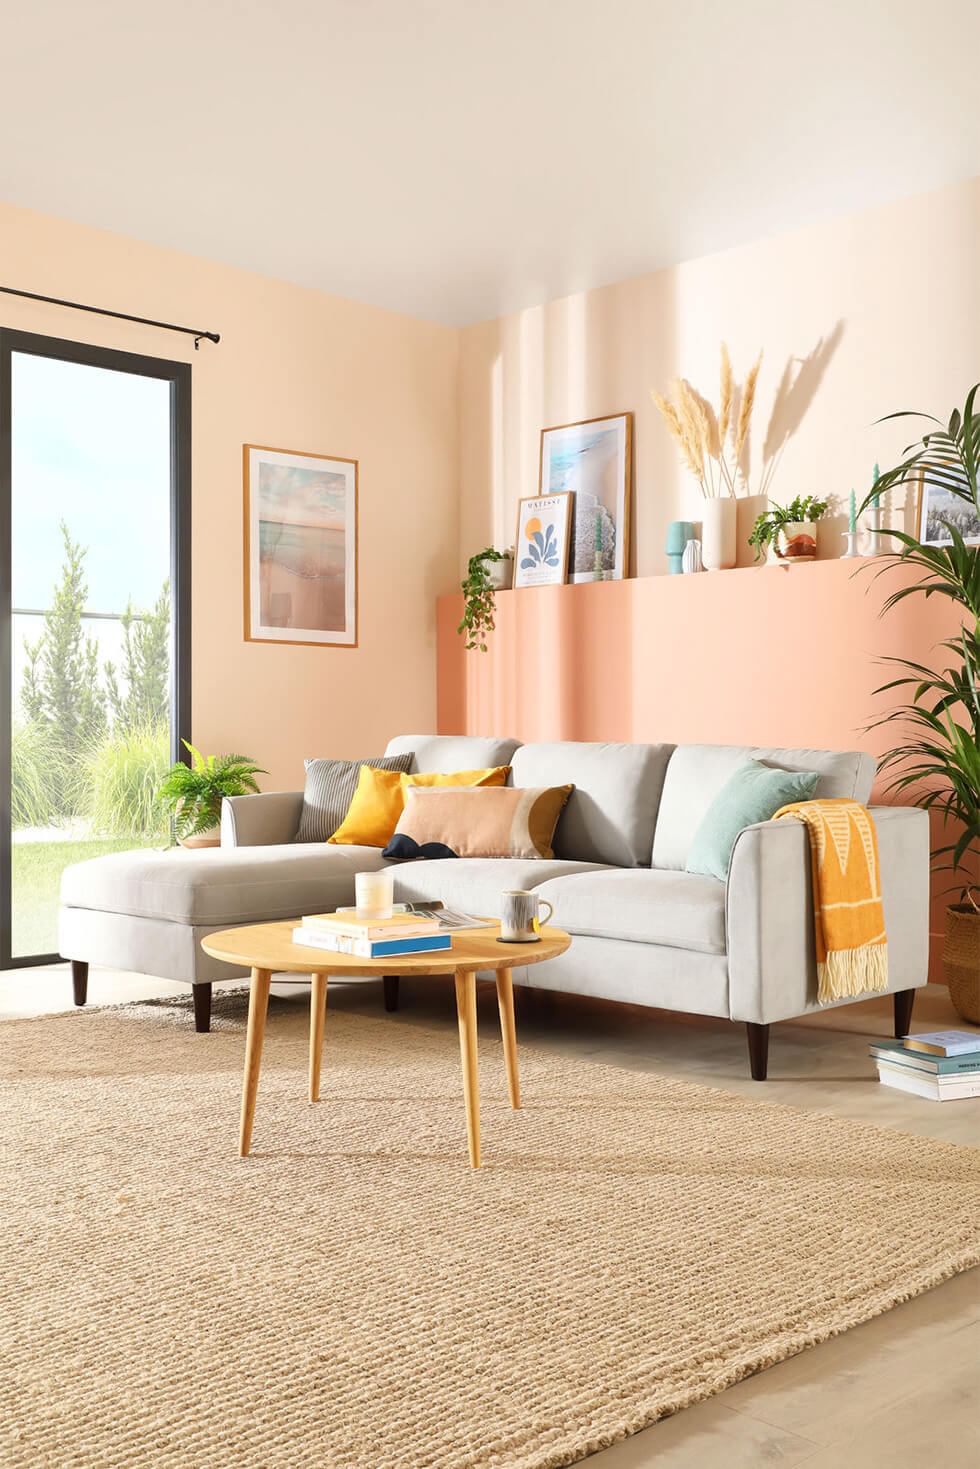  Tropical living room with peach walls and light grey sofa